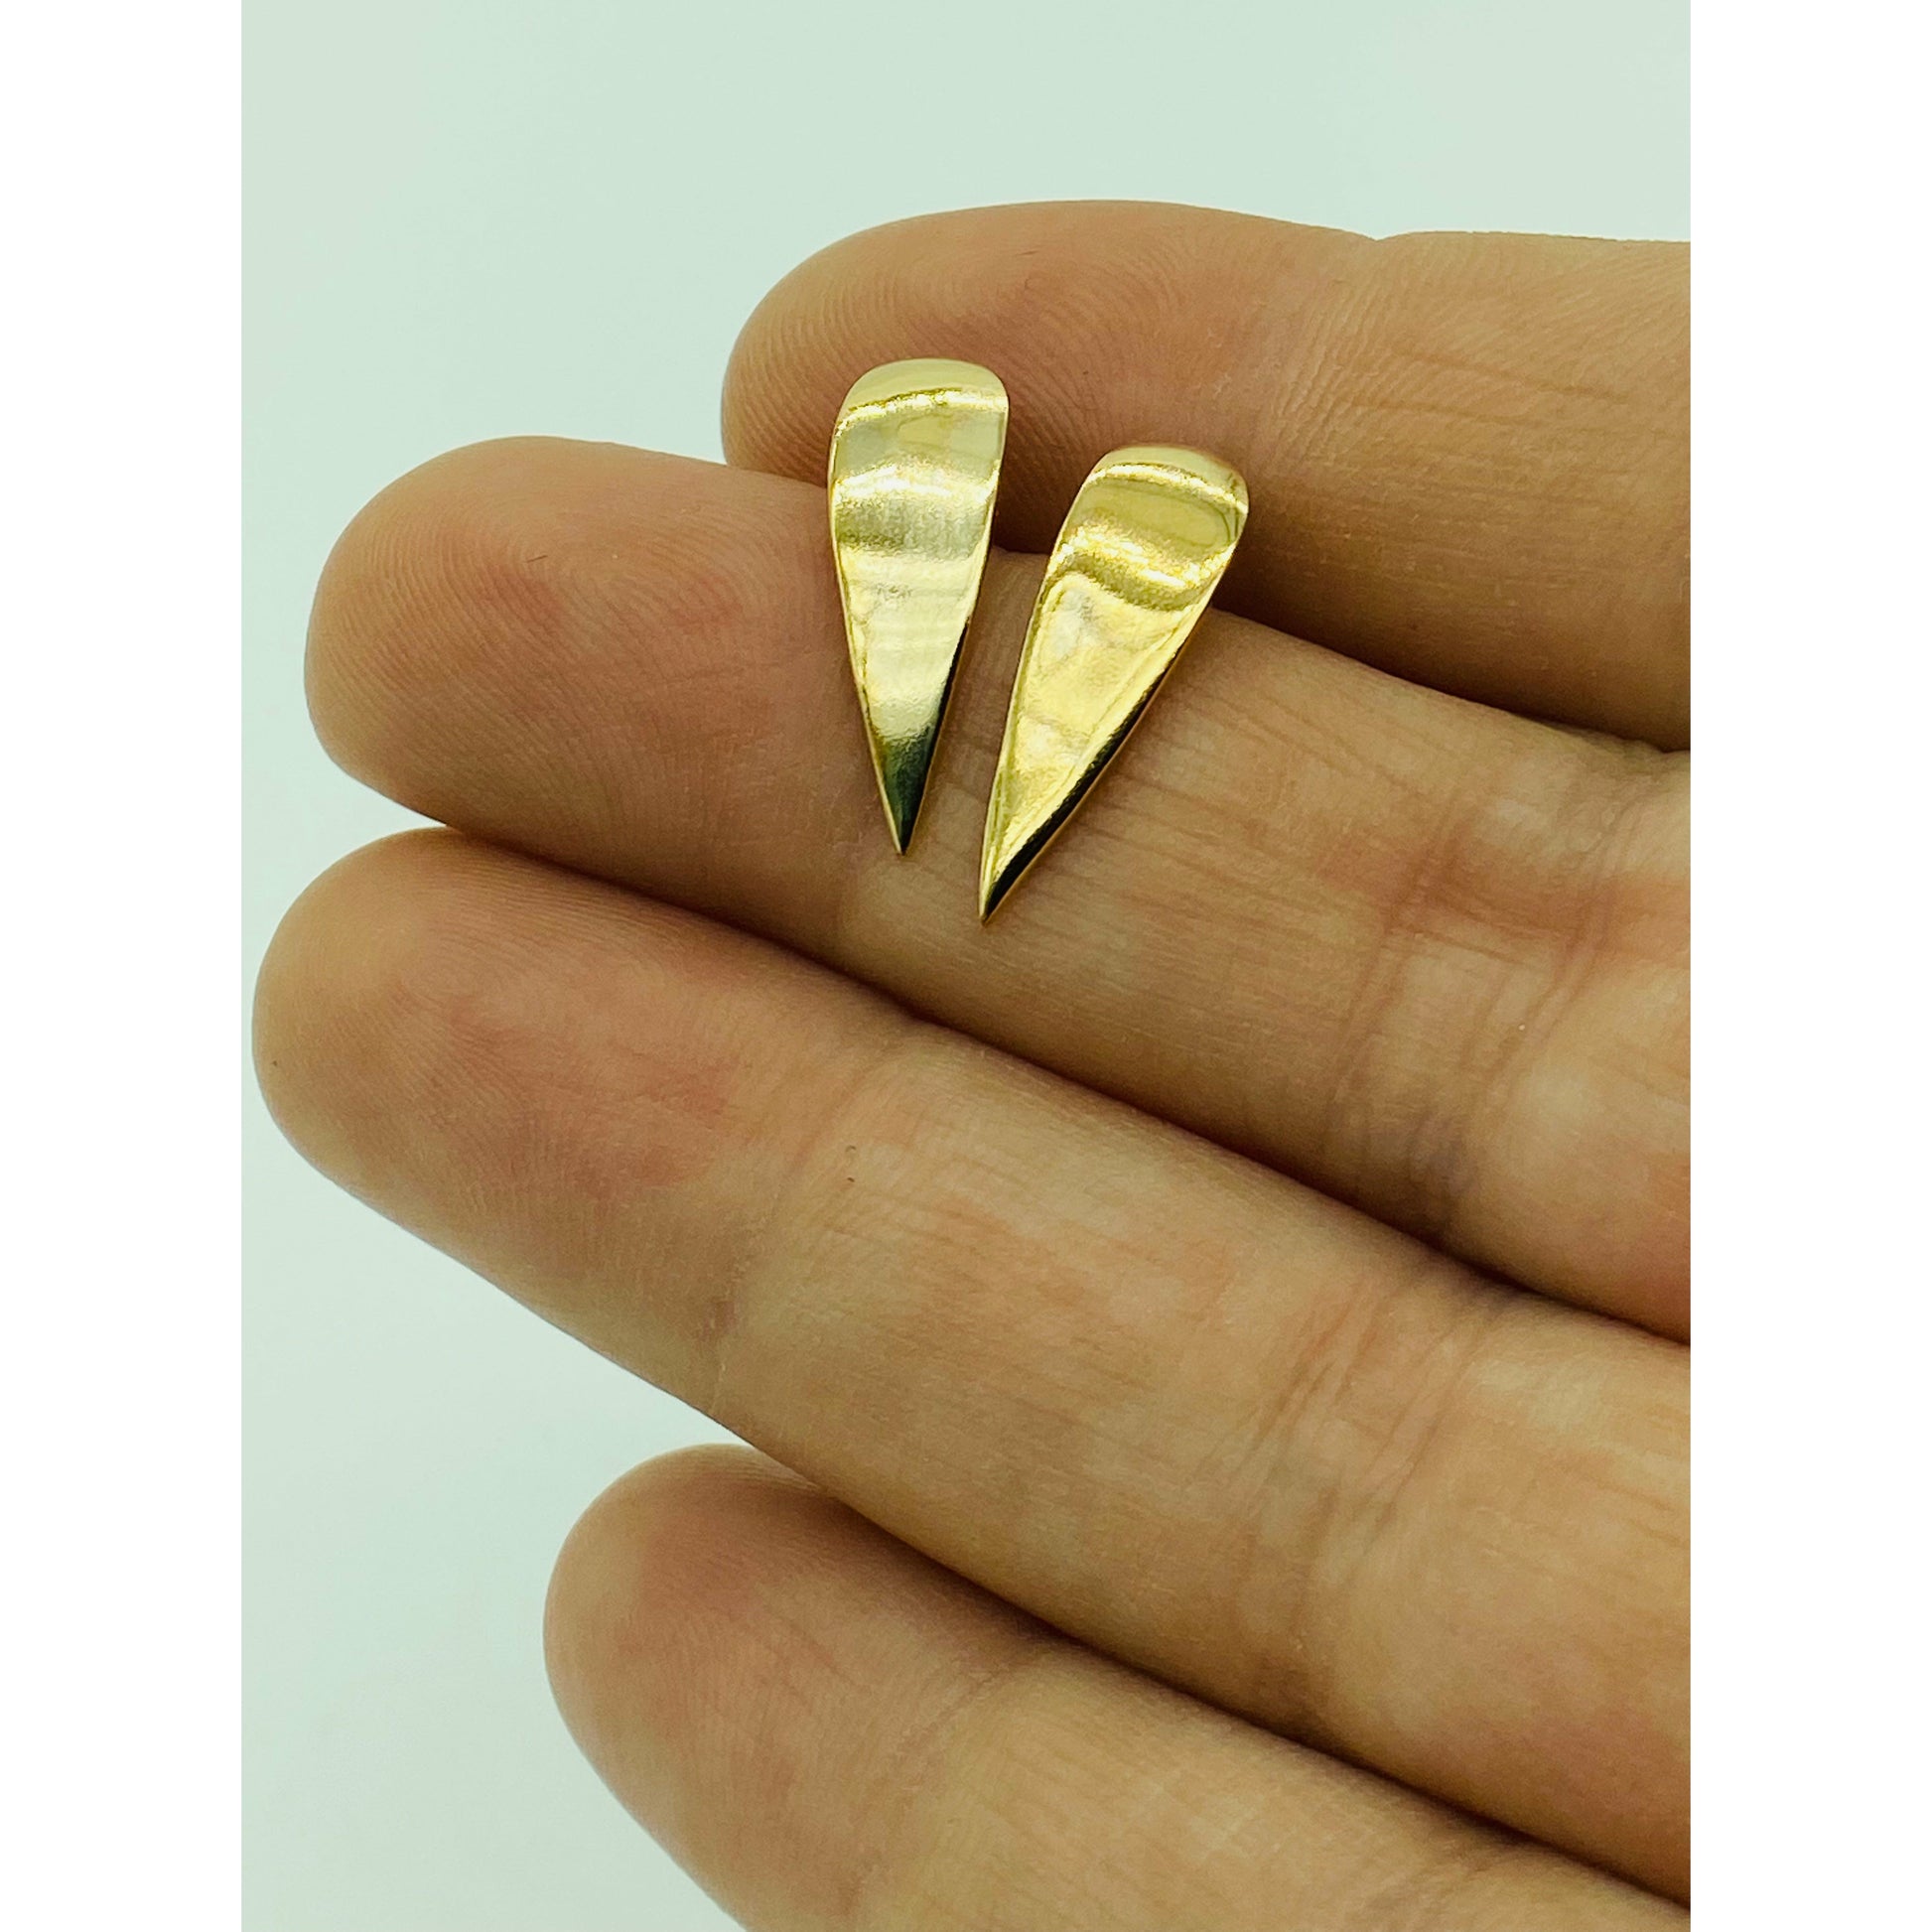 Gold spike earrings with point facing down.